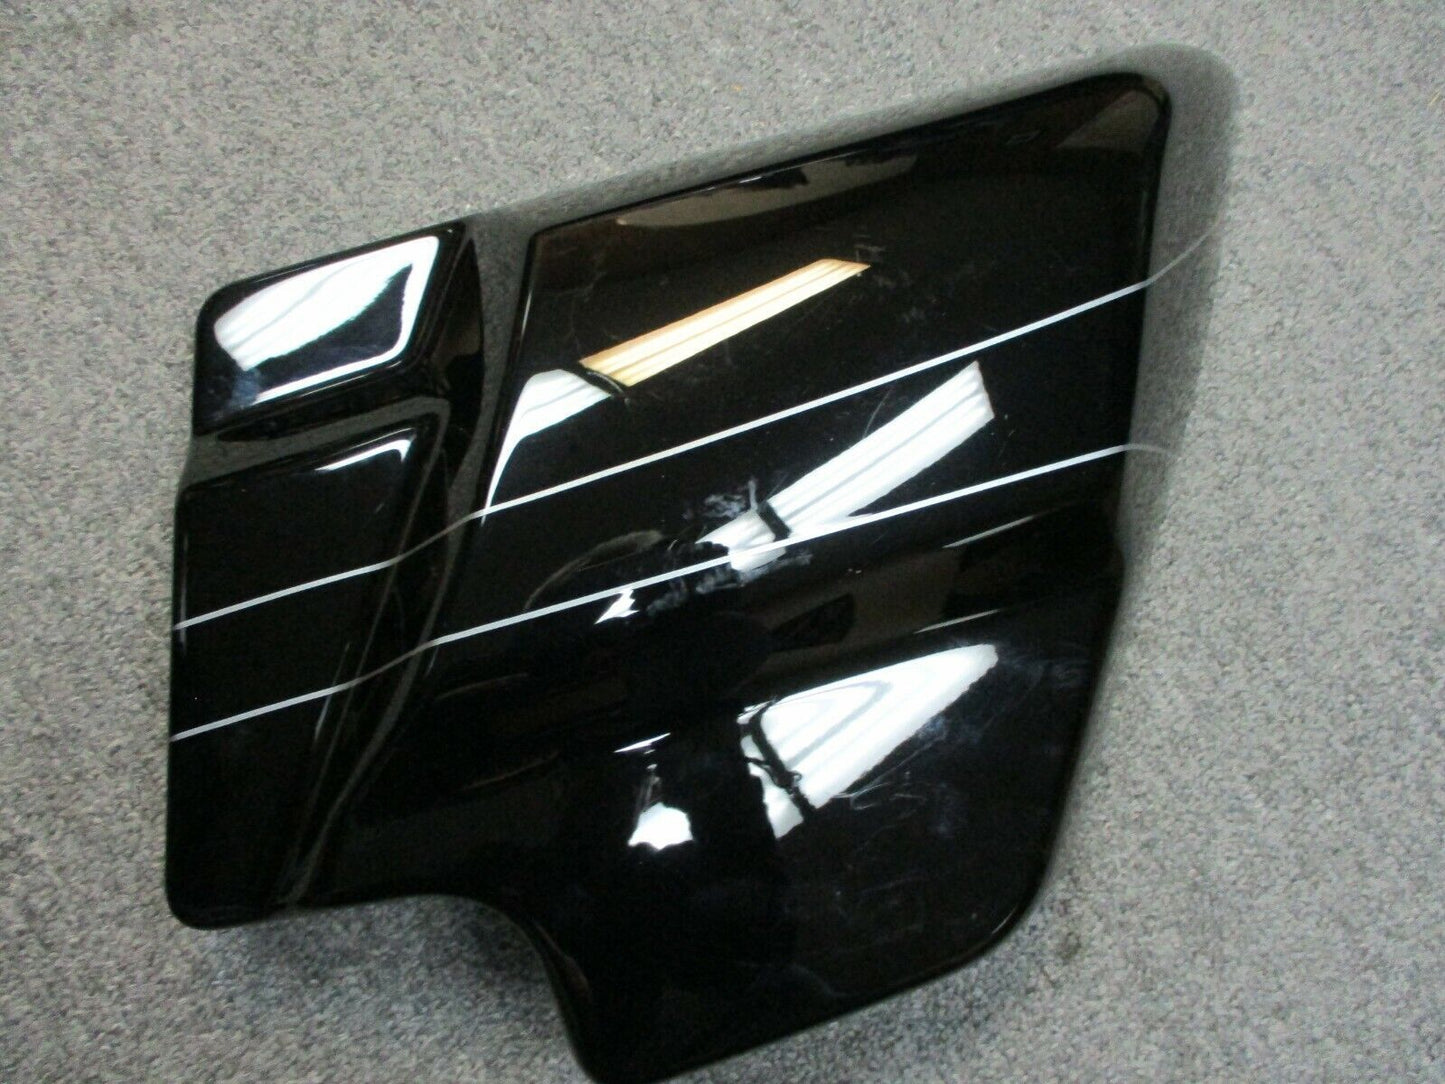 Harley Davidson OEM Right Side Cover Vivid Black with Silver Stripes 66048-09A